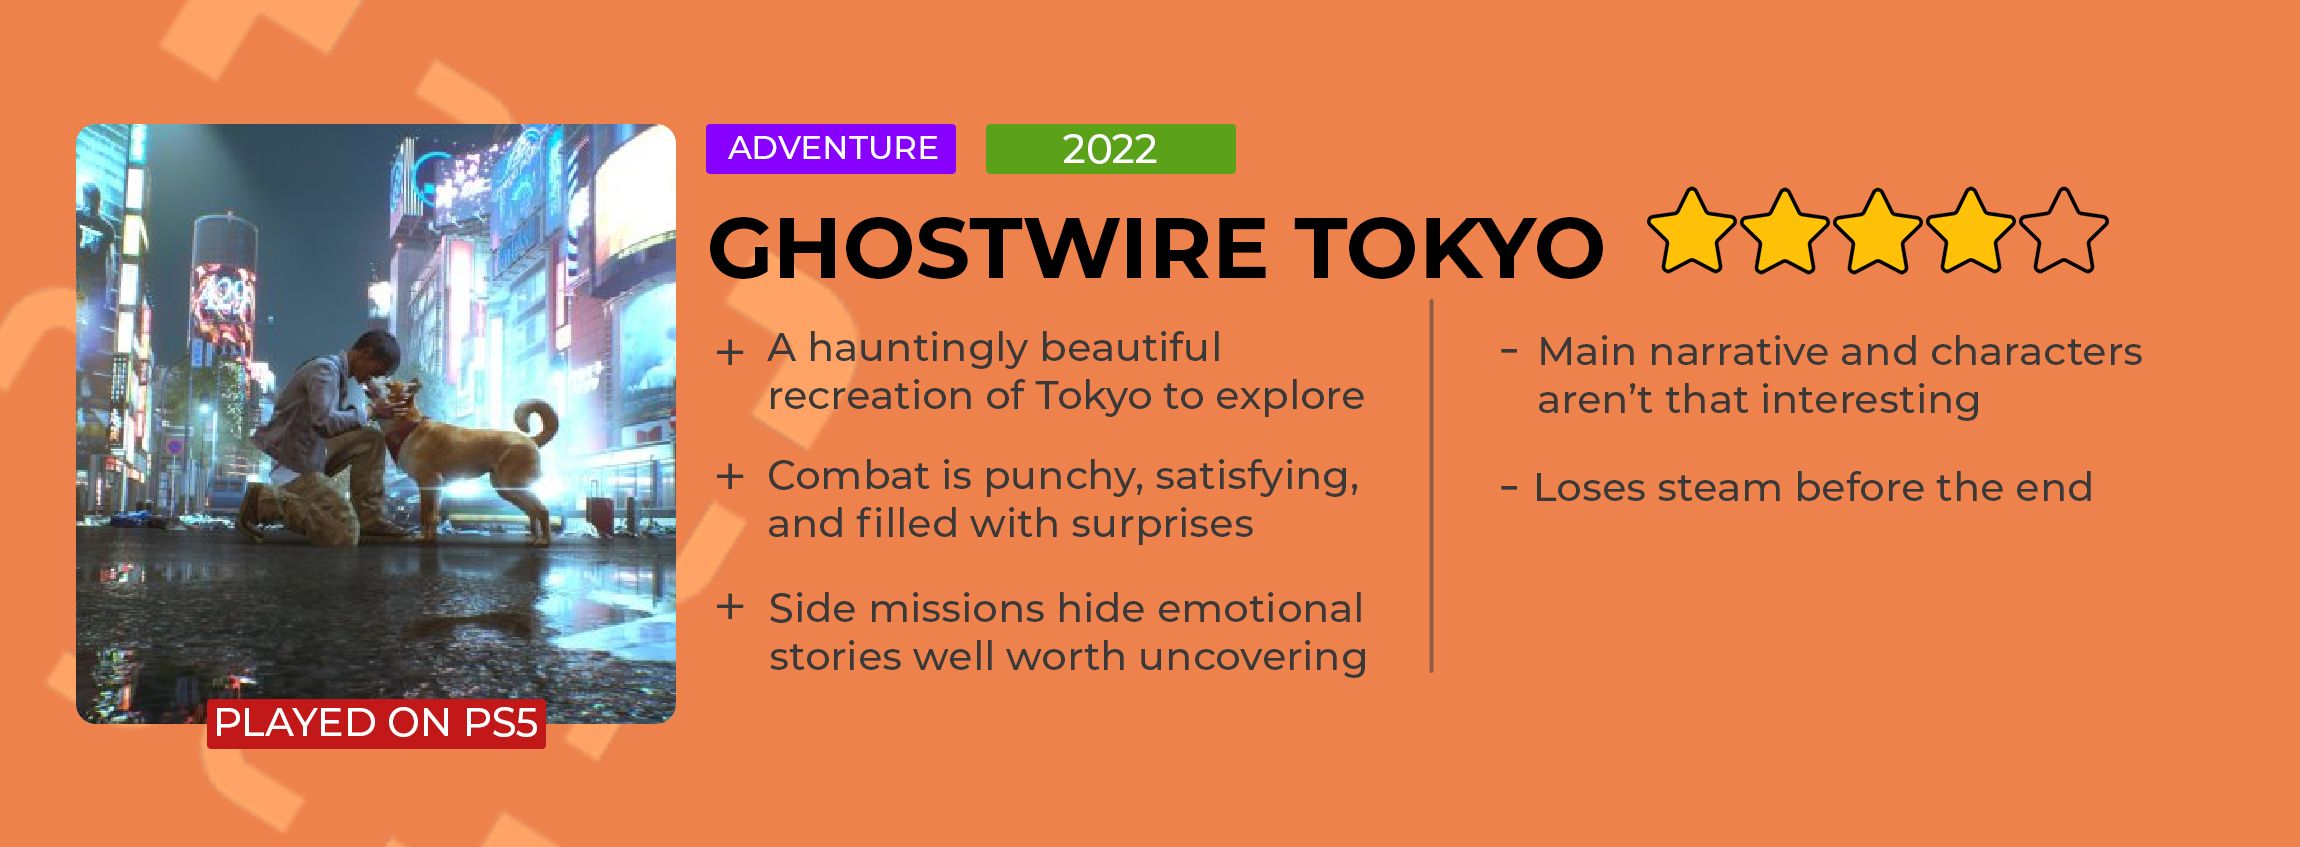 Ghostwire Tokyo Review Card